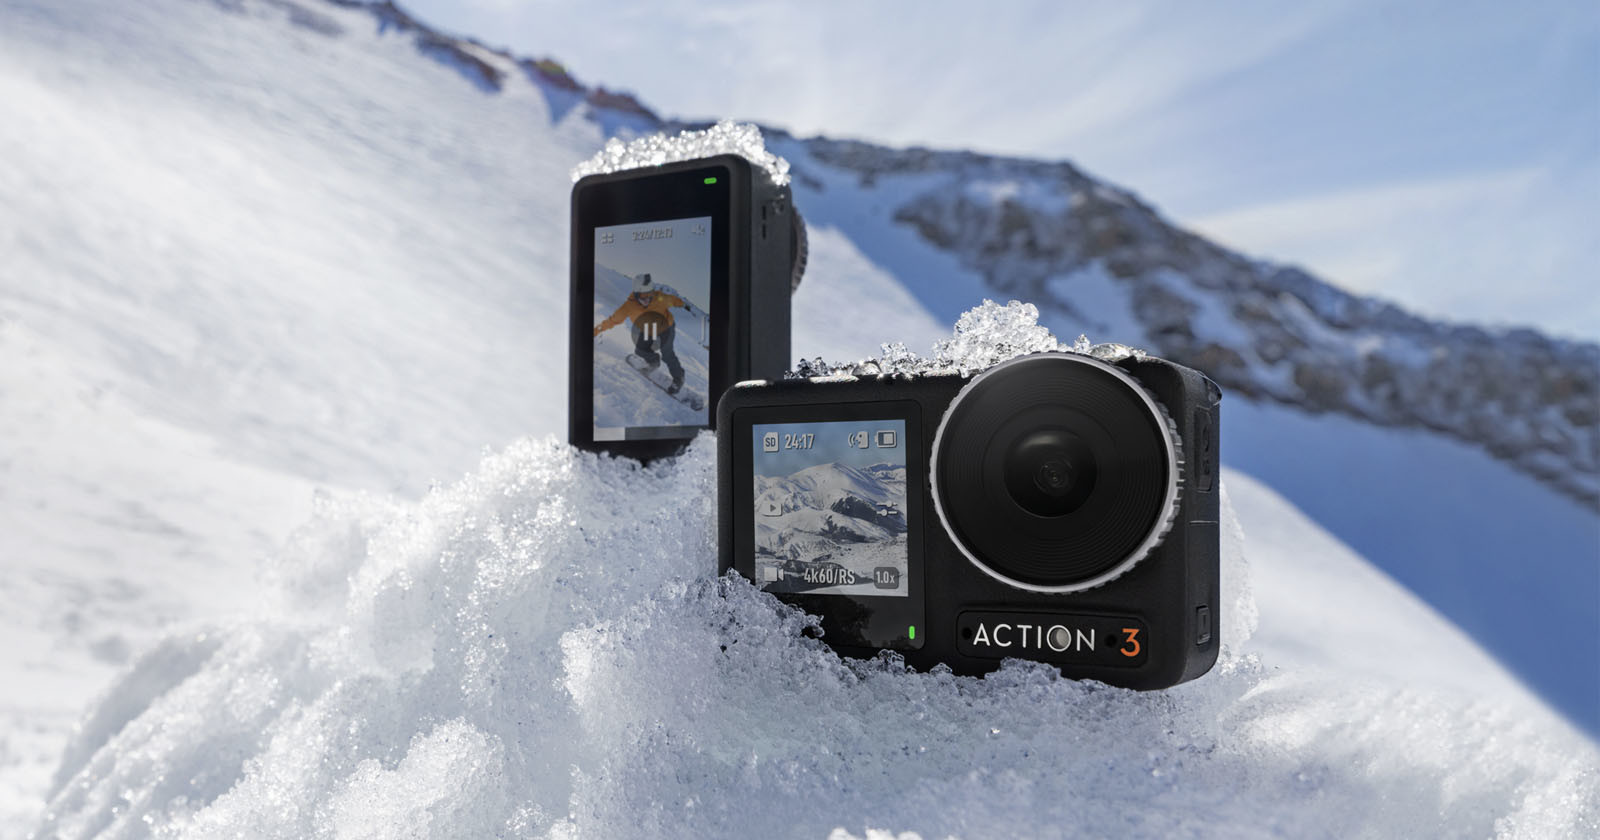 DJIs Osmo Action 3 has Extreme Battery Life and 4K 120 FPS Capture